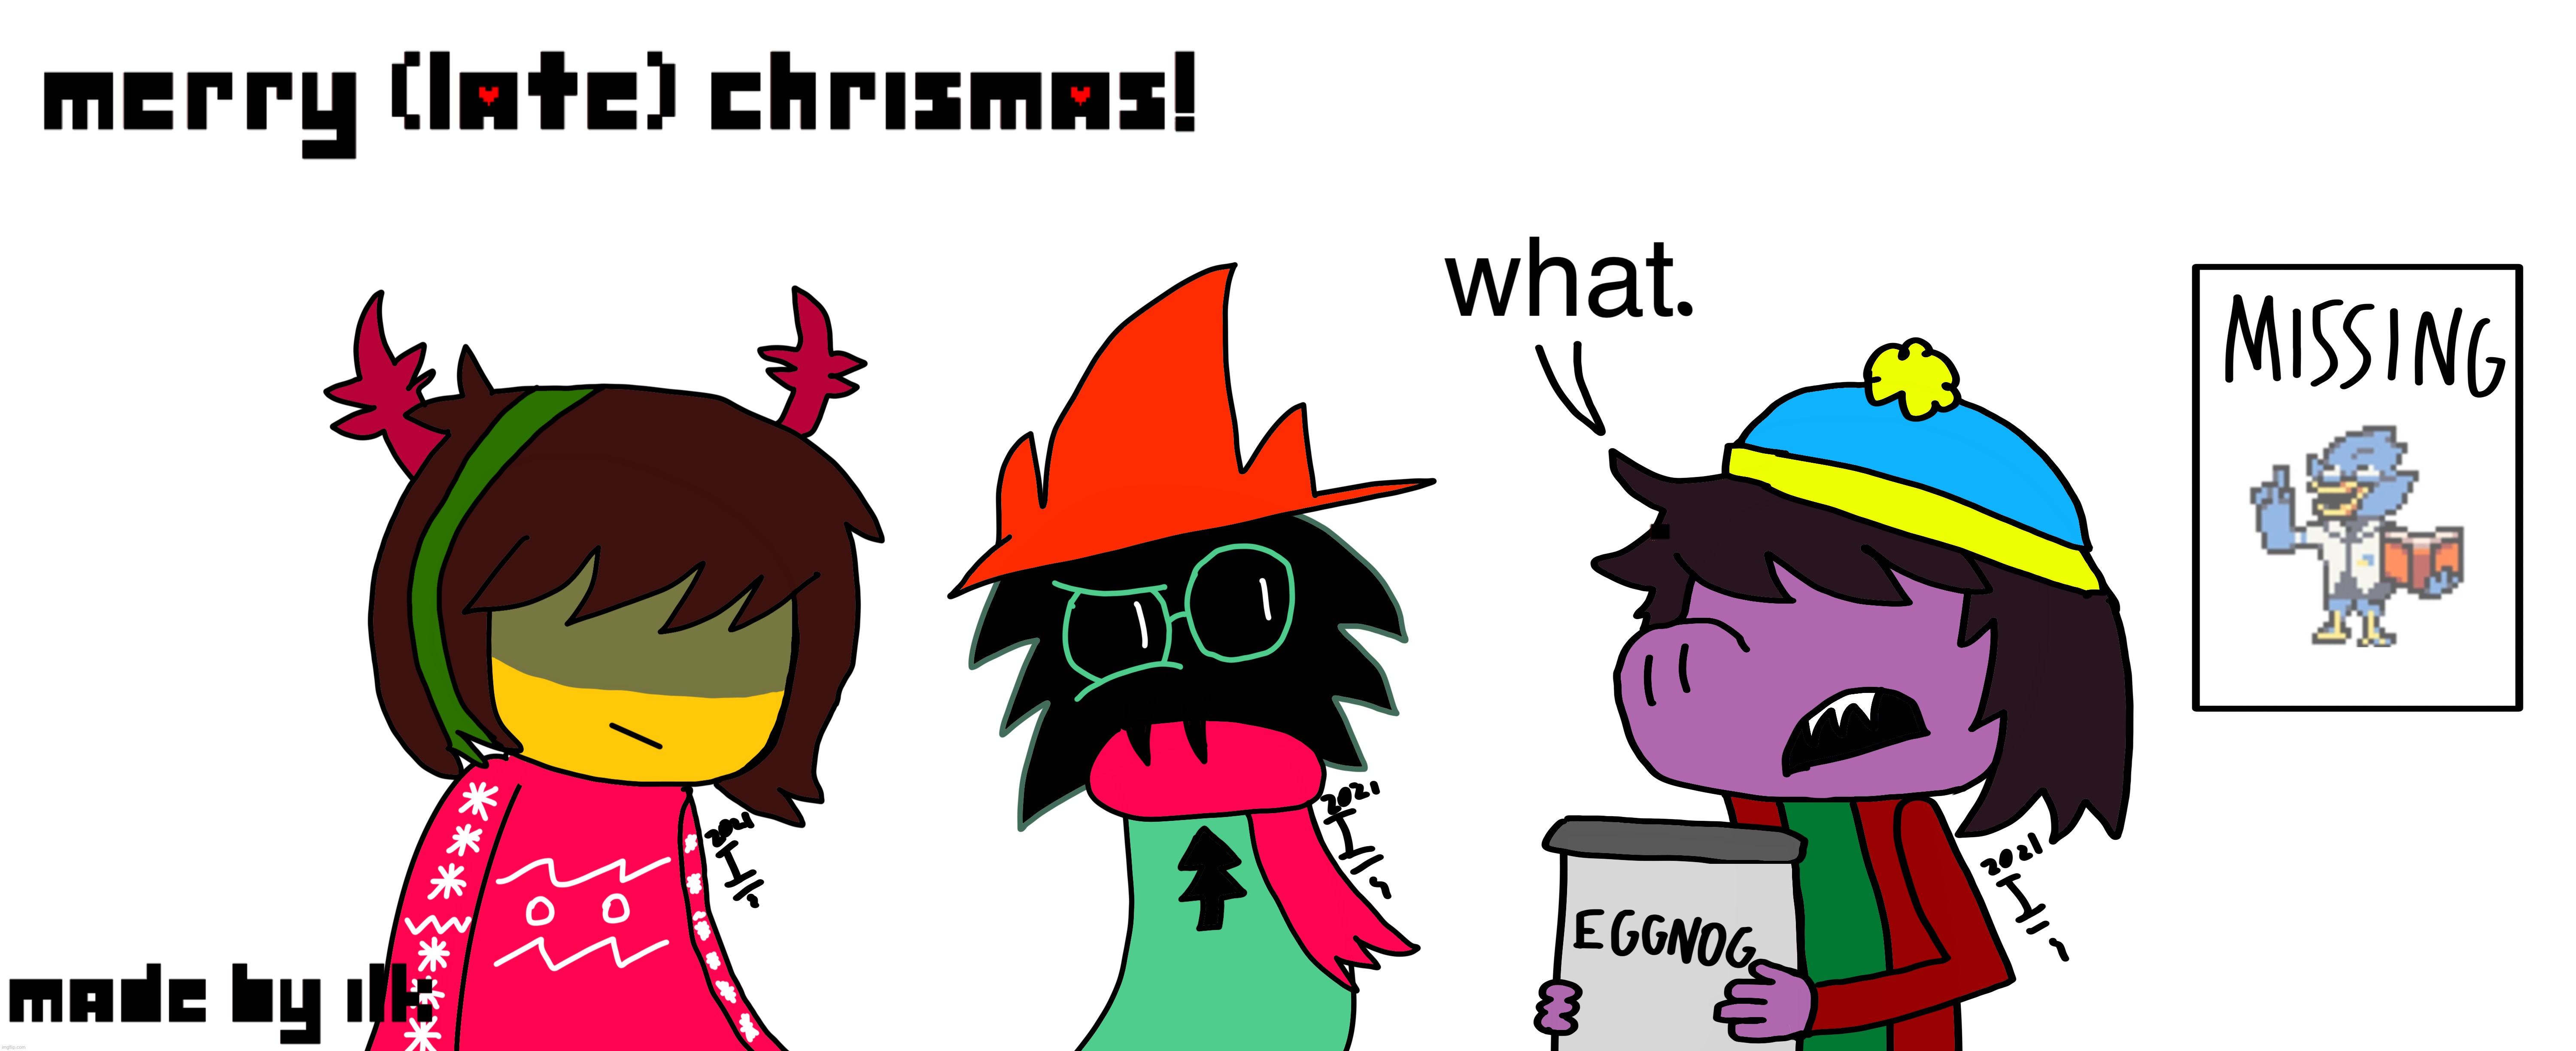 merry (late) krismas | image tagged in deltarune,christmas | made w/ Imgflip meme maker